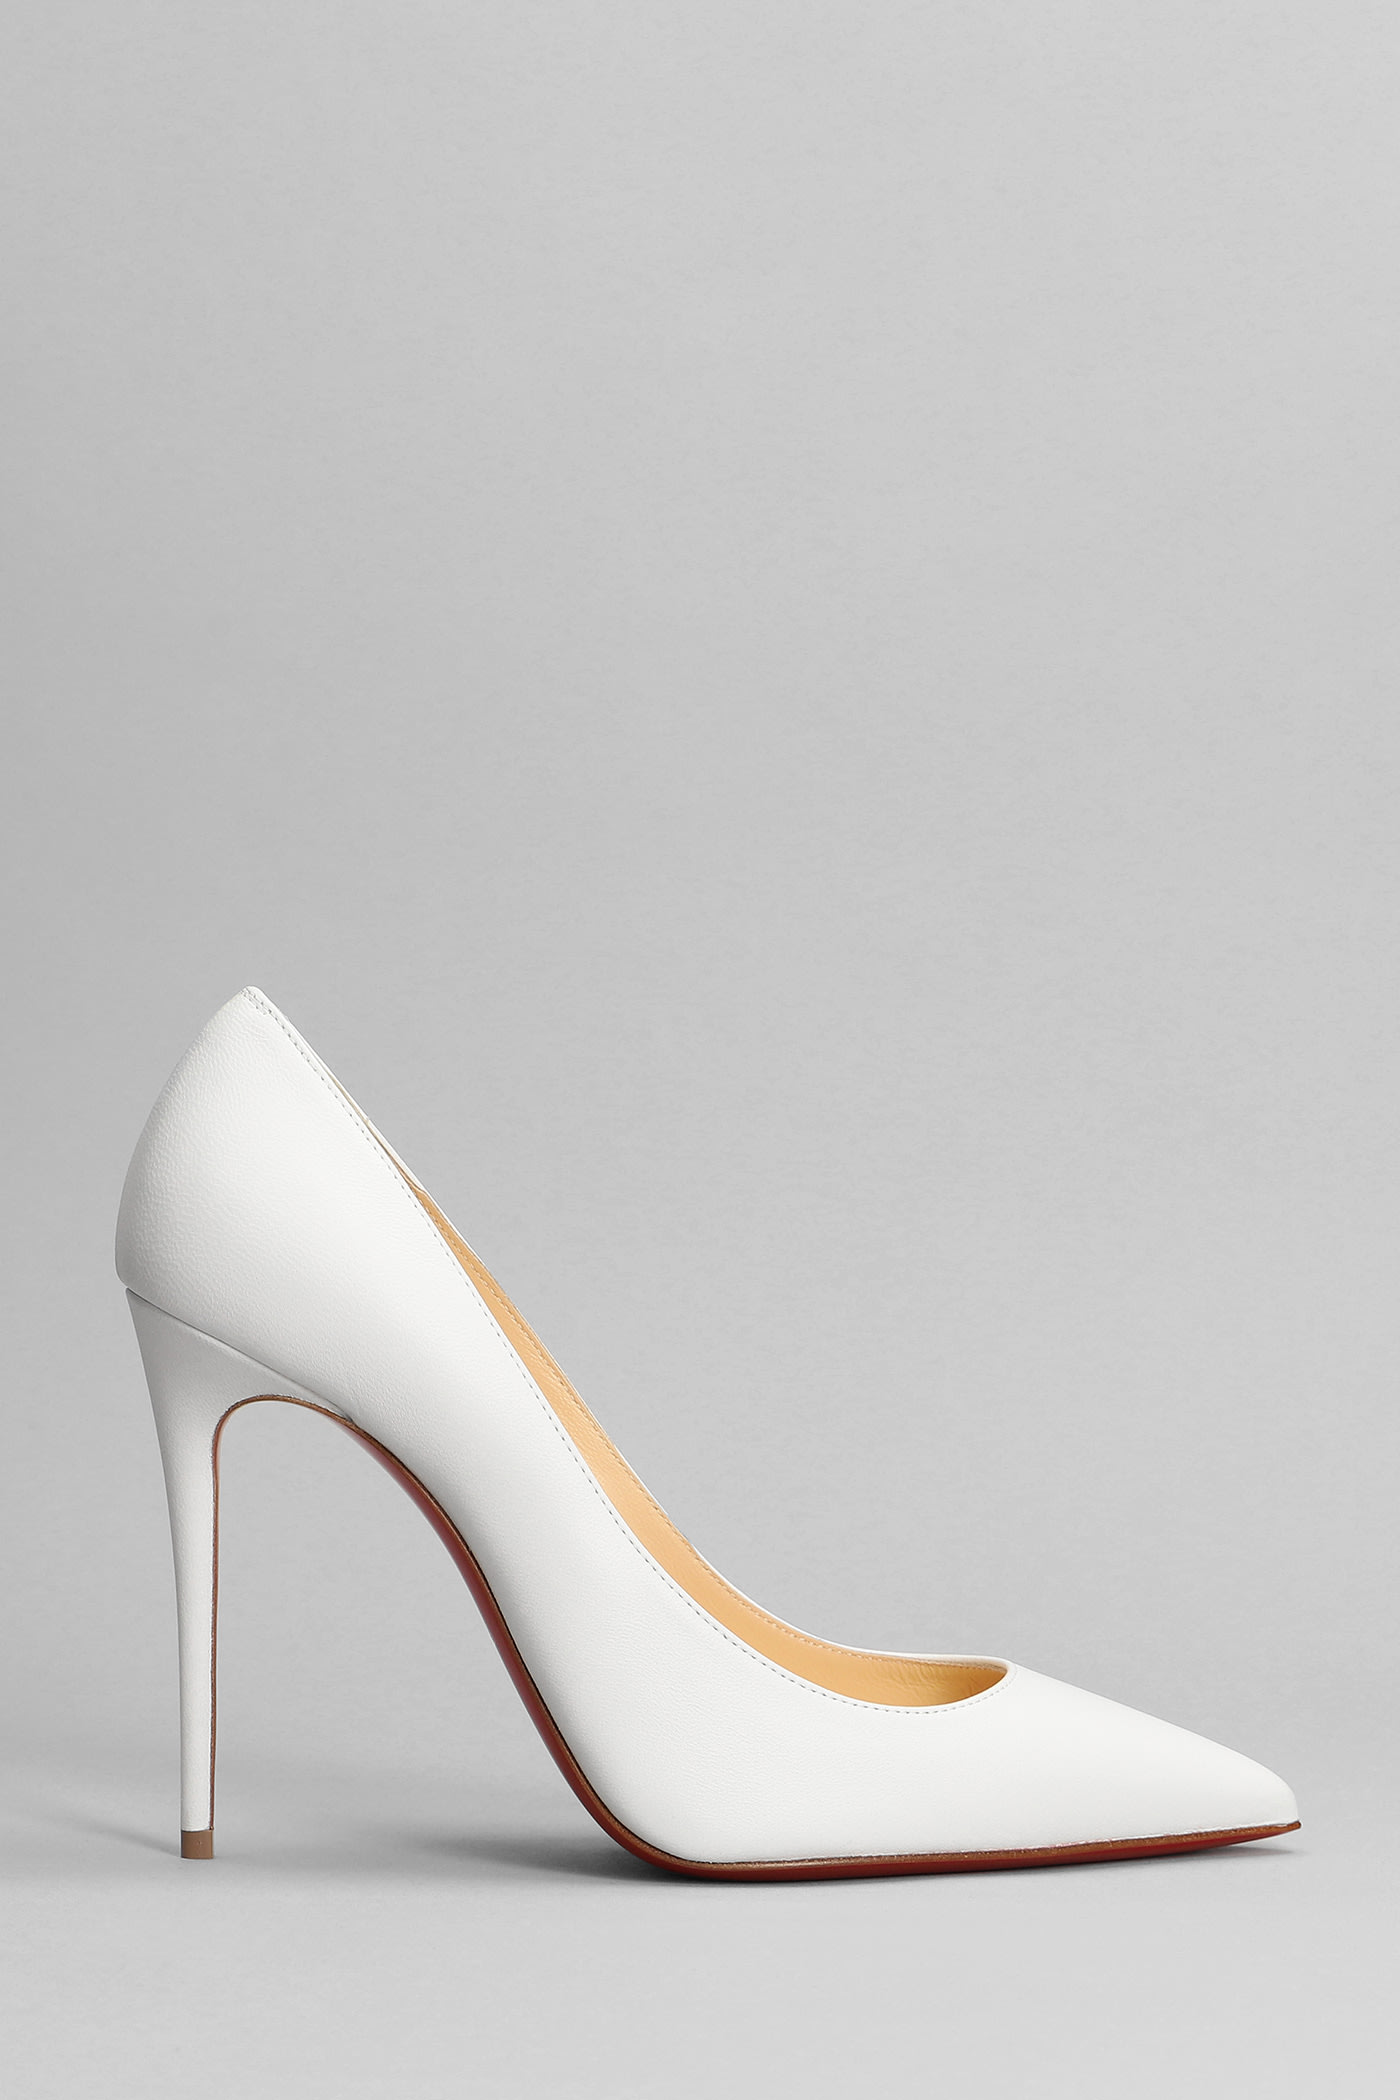 CHRISTIAN LOUBOUTIN KATE 100 PUMPS IN WHITE LEATHER